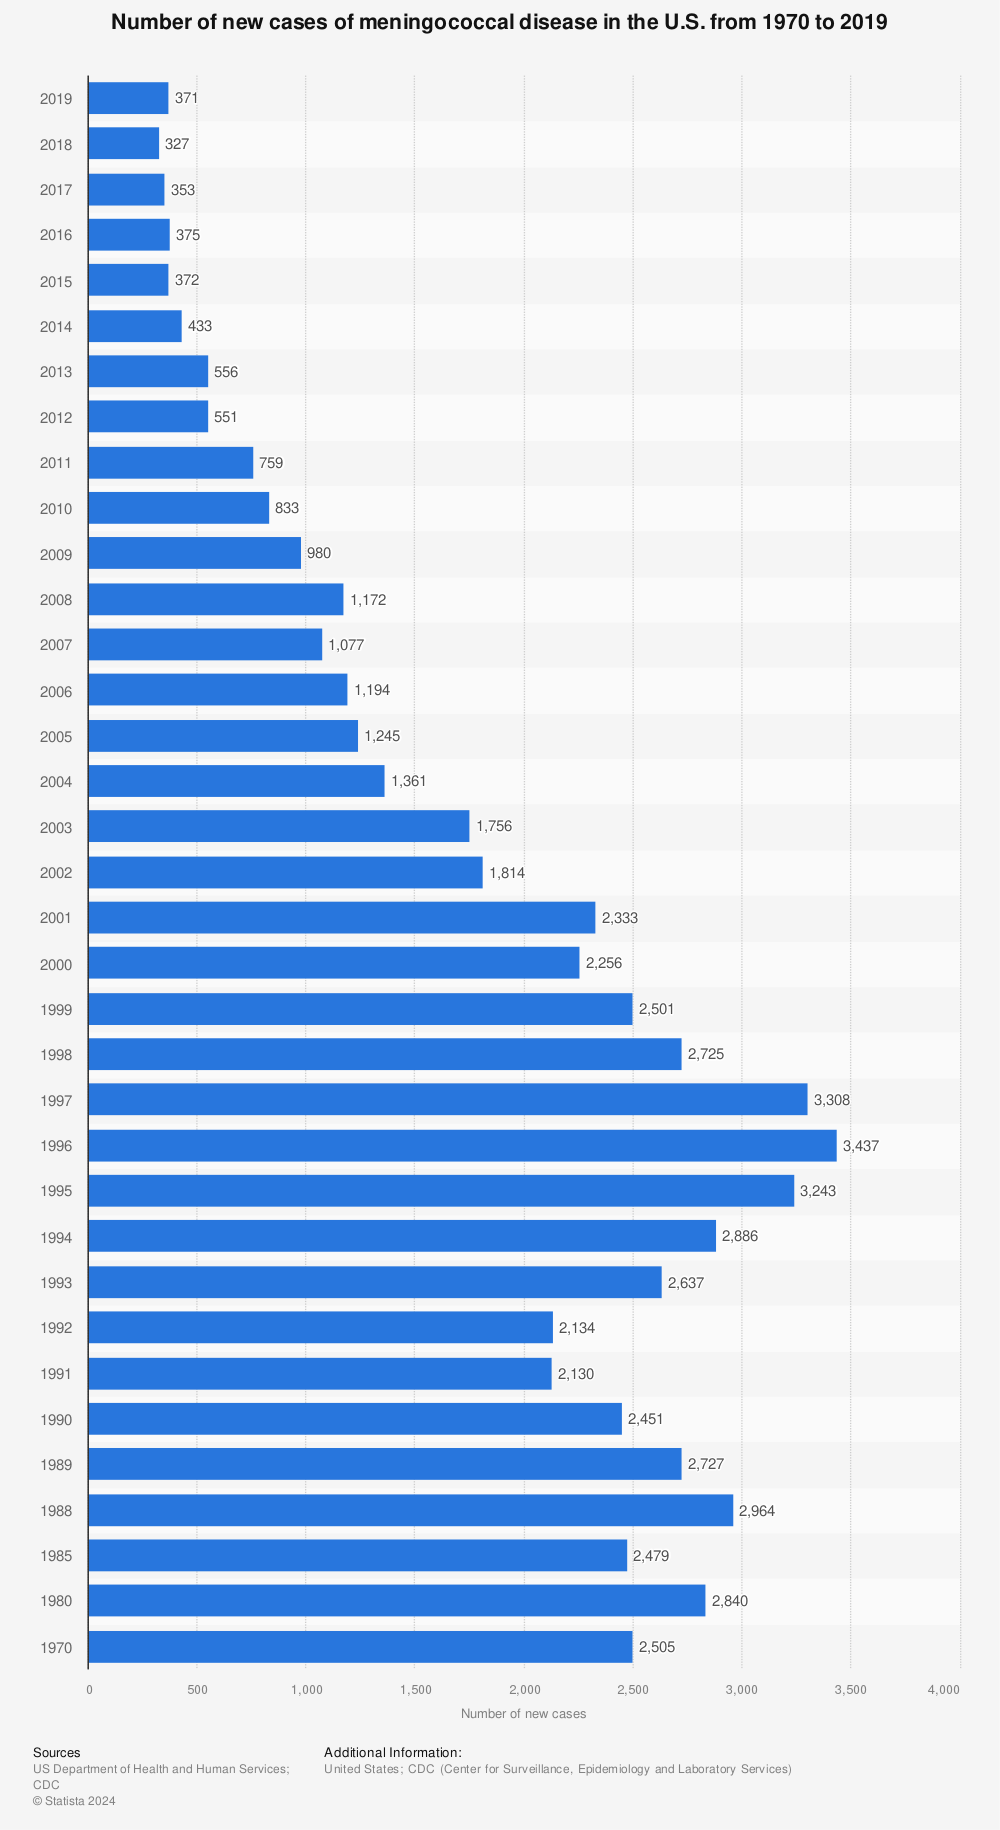 Statistic: Number of new cases of meningococcal disease in the U.S. from 1970 to 2019 | Statista